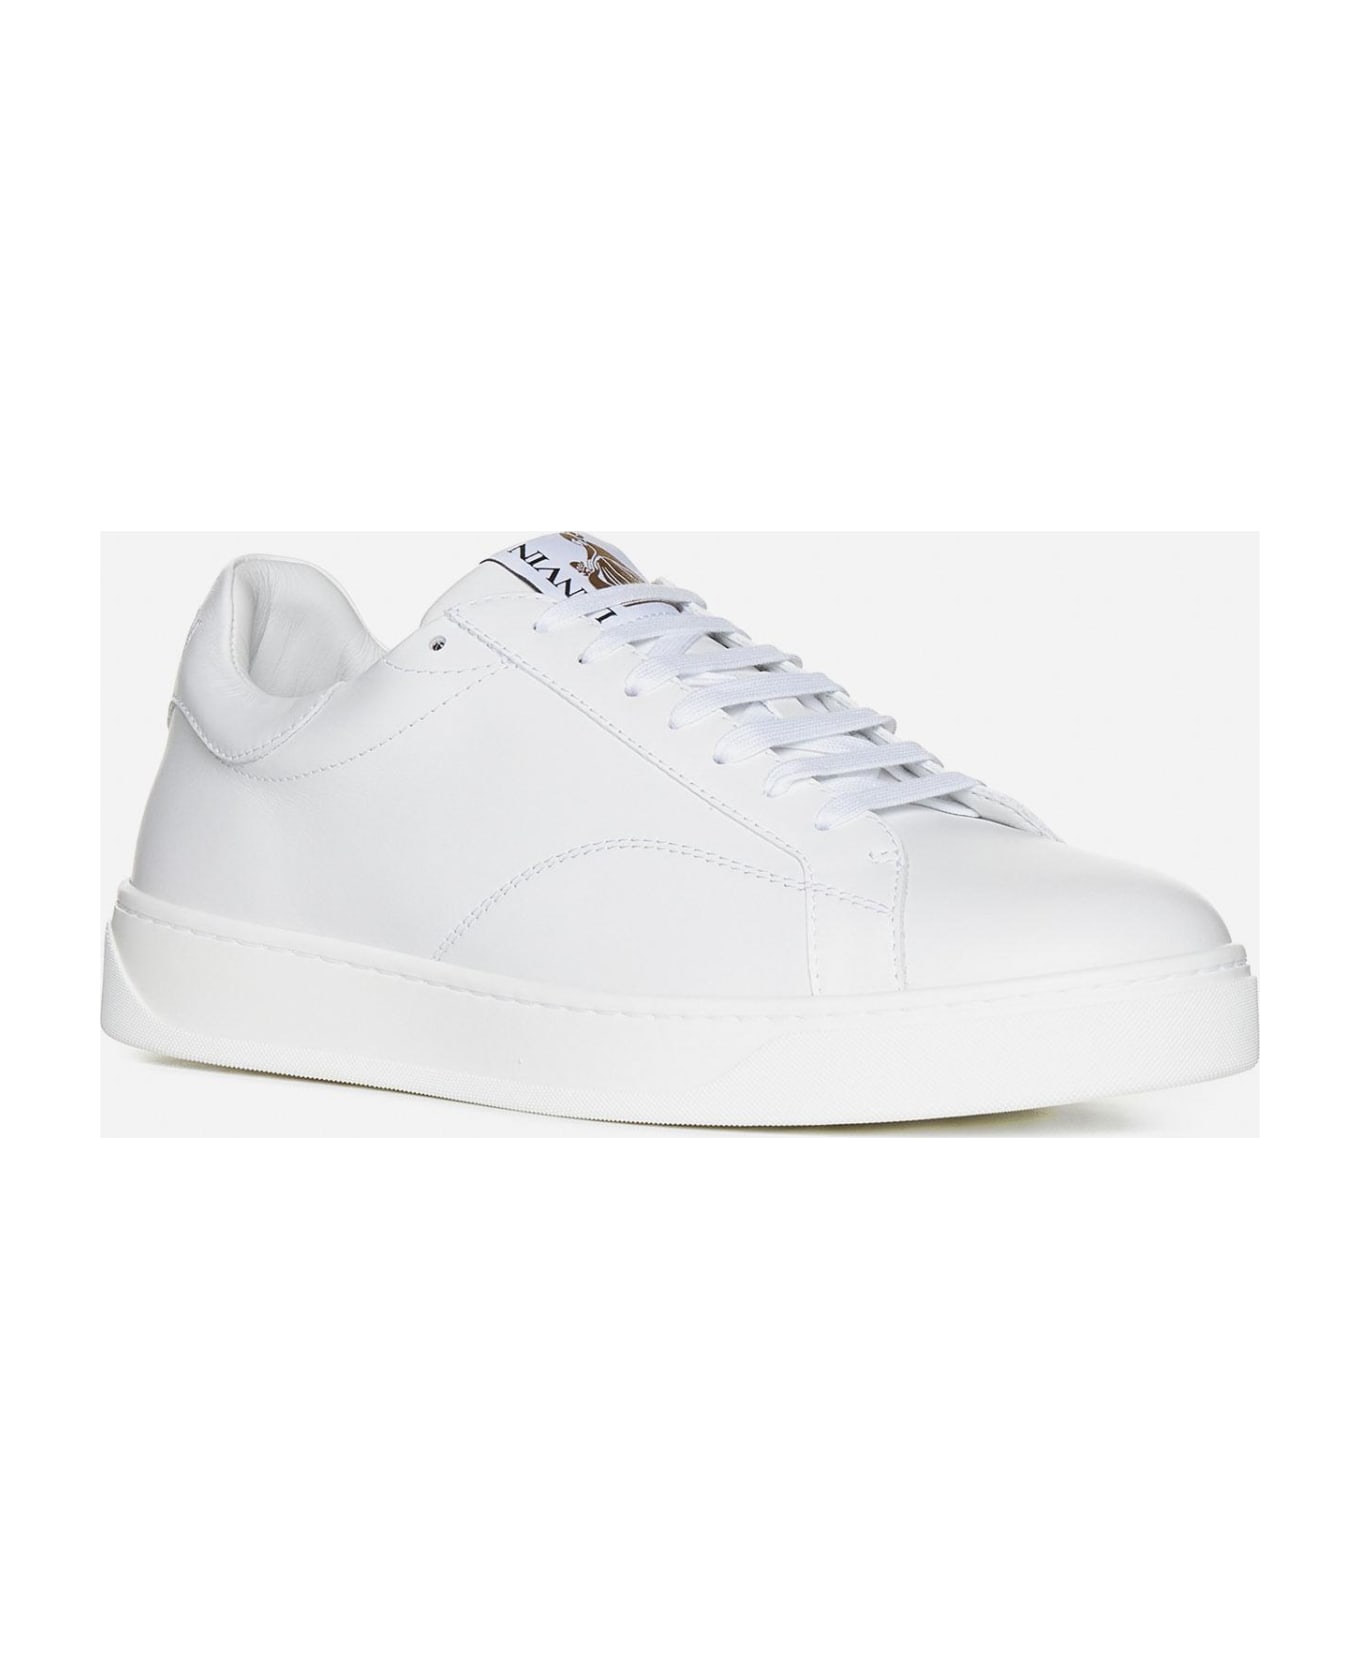 Lanvin Ddb0 Leather Sneakers - White/white